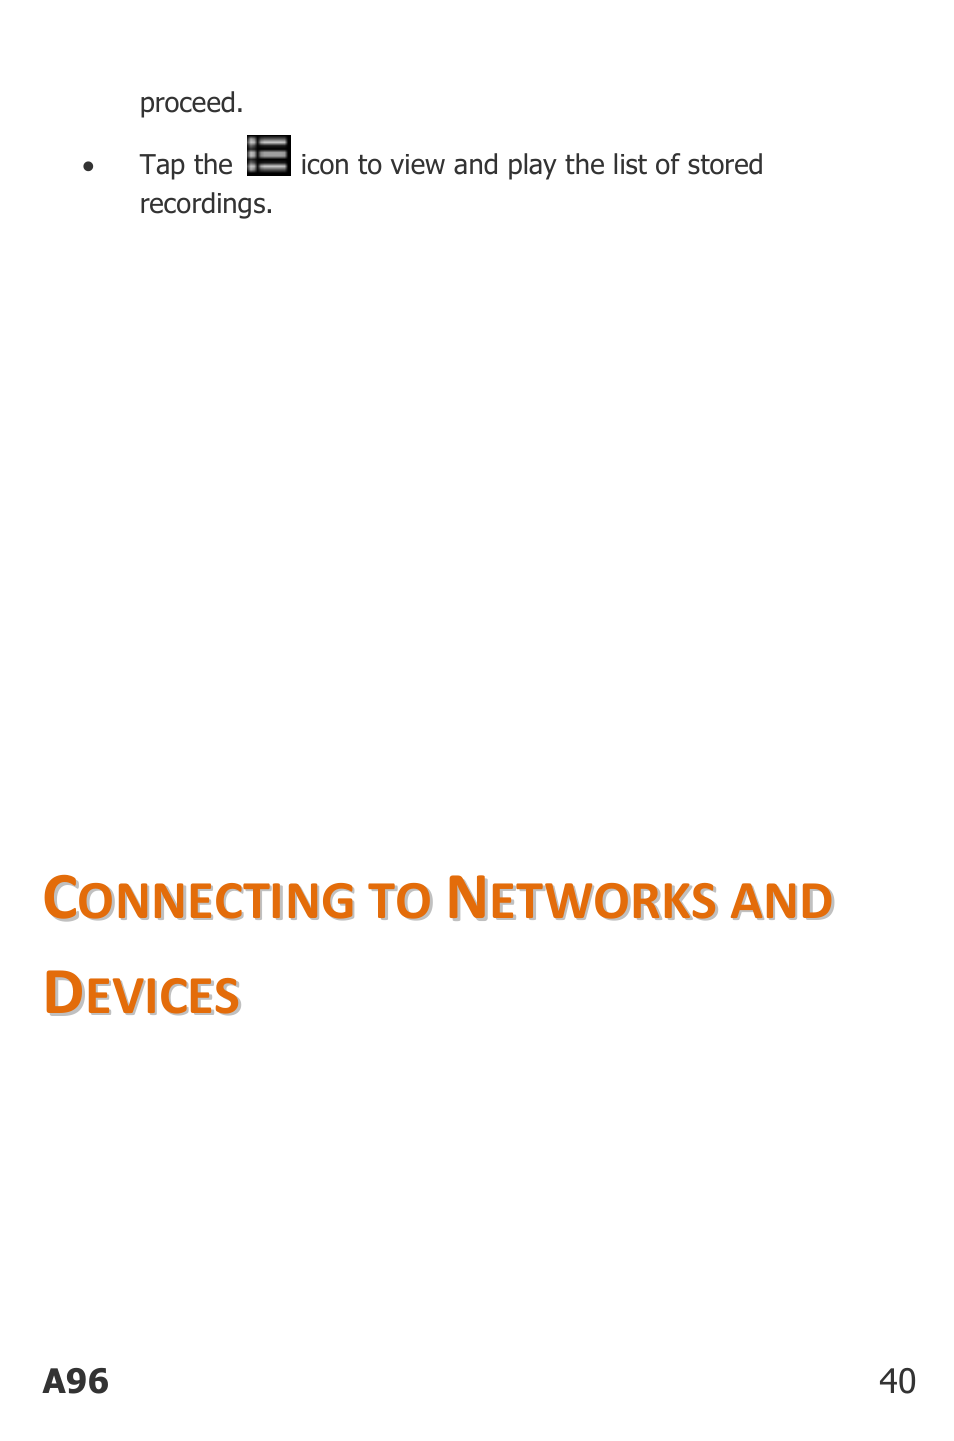 Onnecting to, Etworks and, Evices | Micromax Canvas Power User Manual | Page 40 / 56